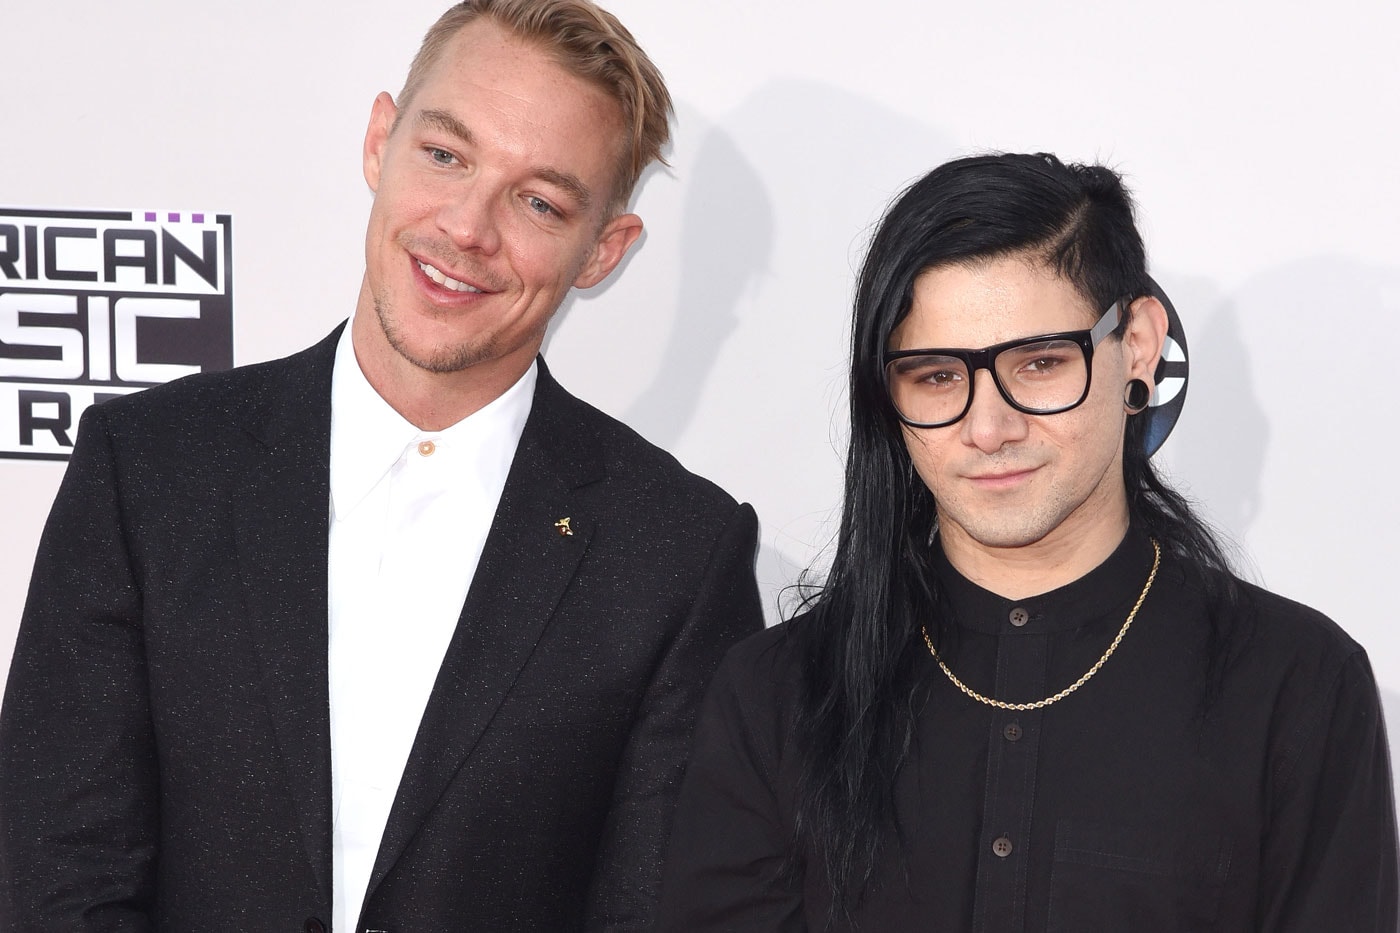 Four Stabbed at Diplo and Skrillex's Las Vegas Show